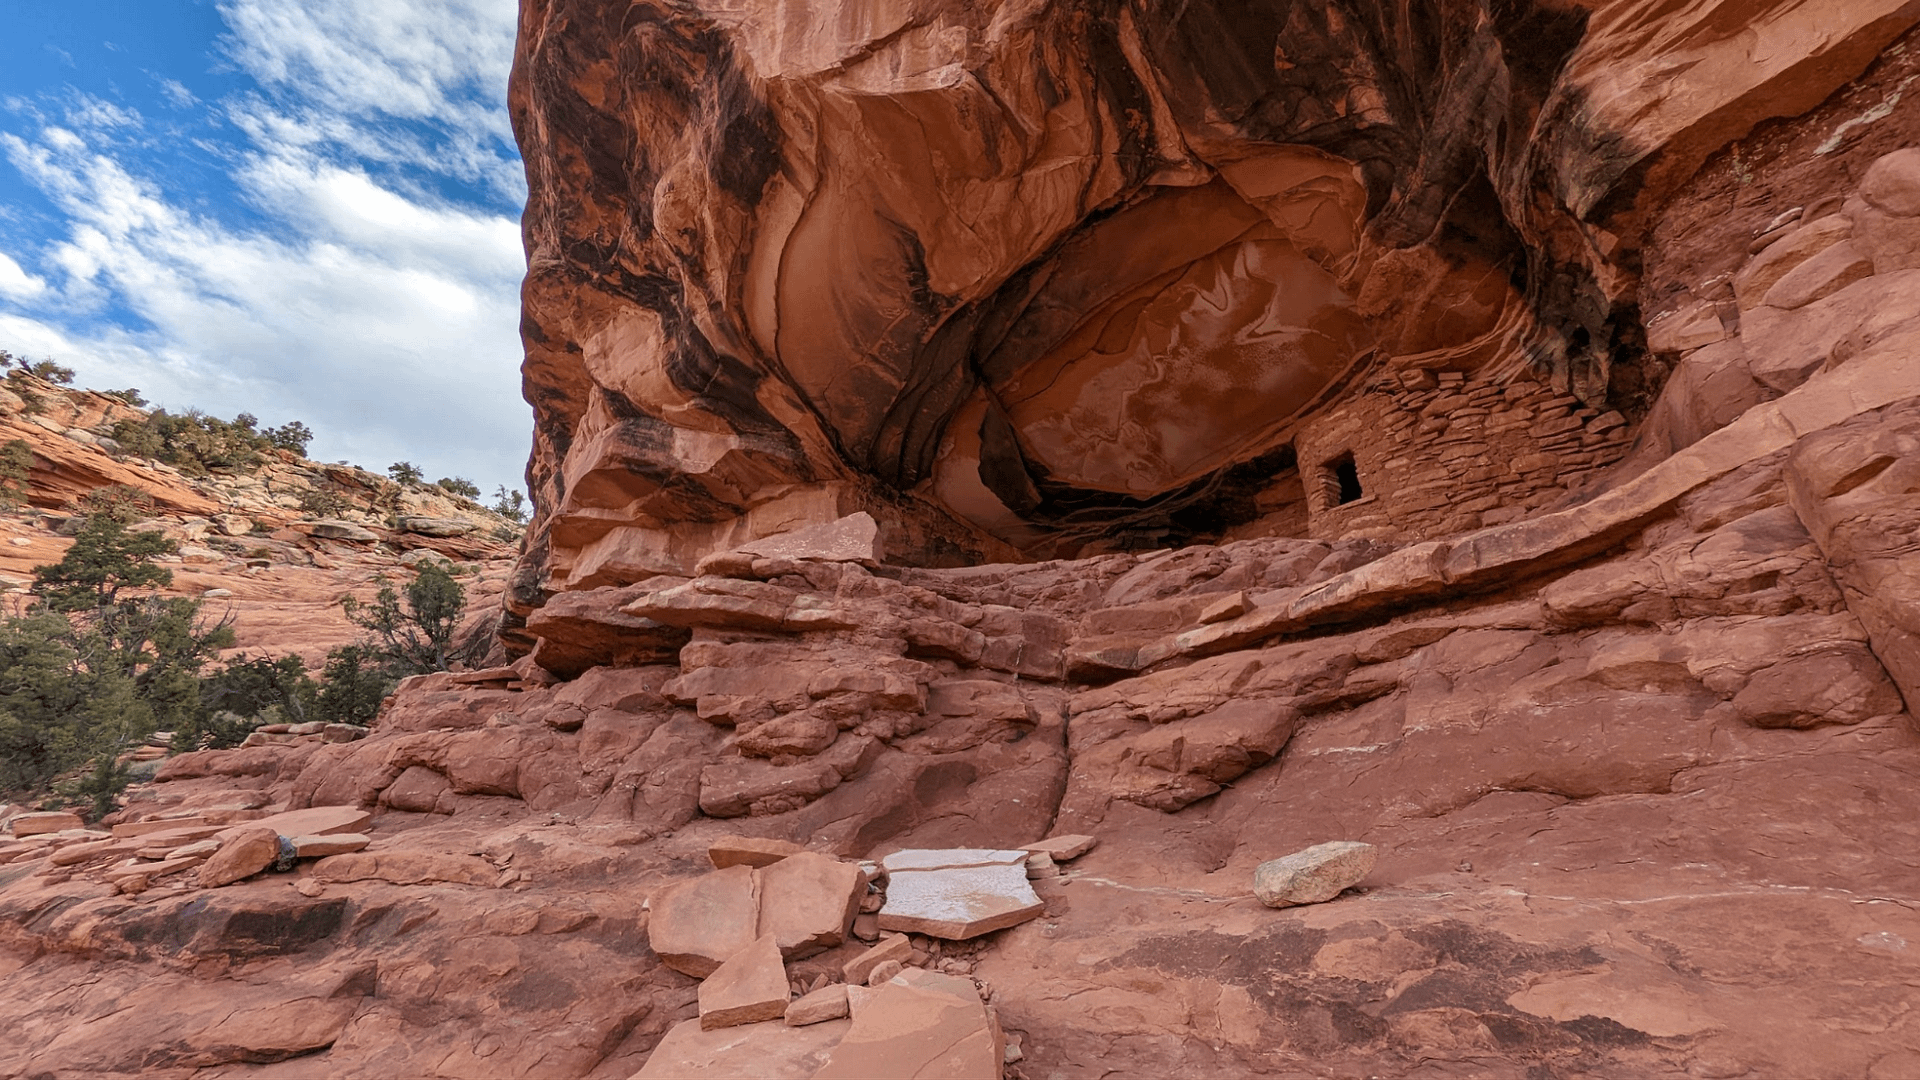 An ancient Indigenous dwelling set among the sandstone rock and cliff